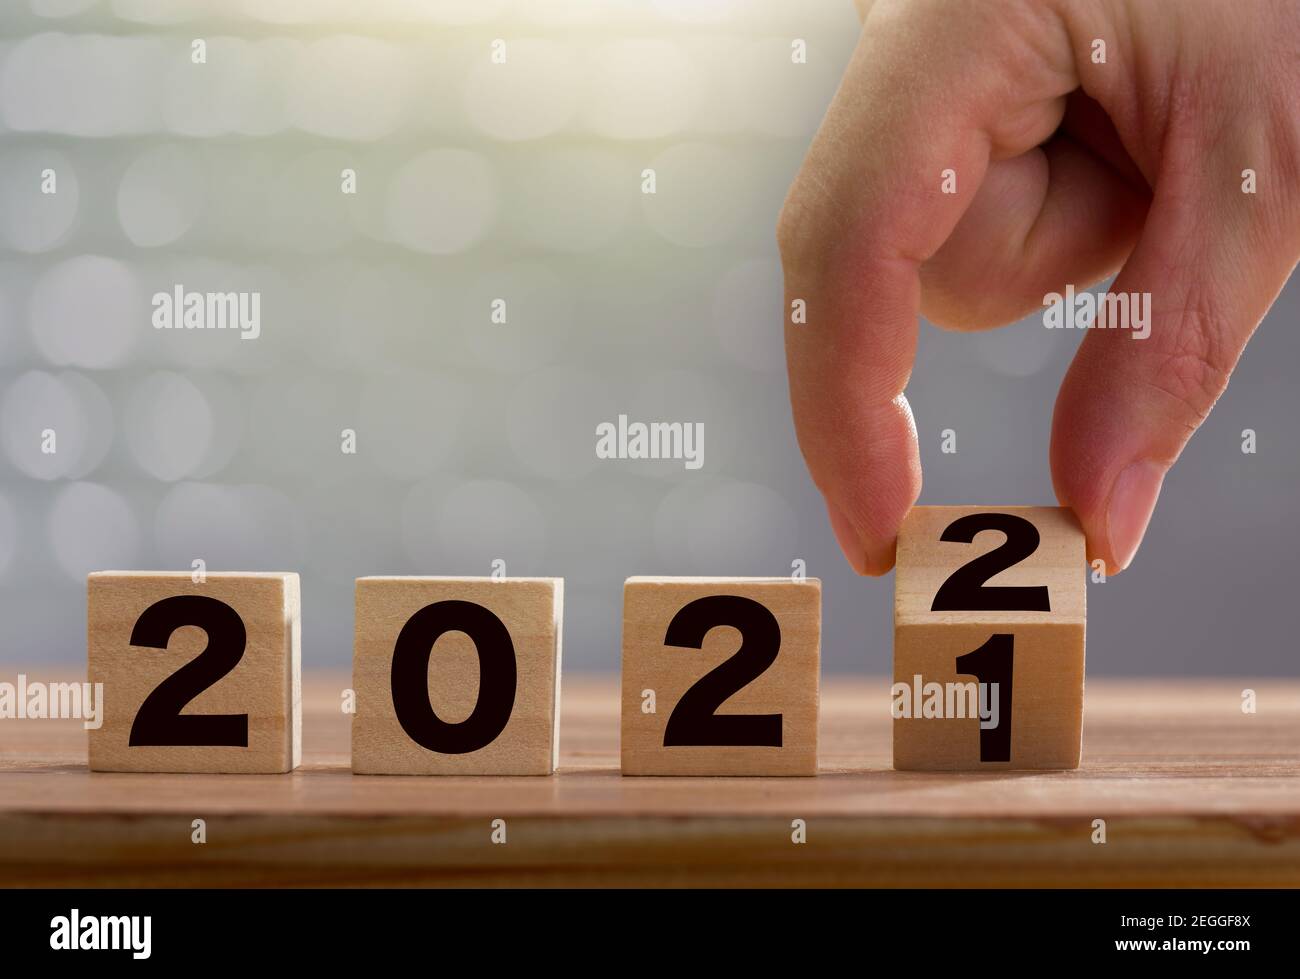 Hand holding wooden cubes with flip over block 2021 to 2022. New year concept Stock Photo